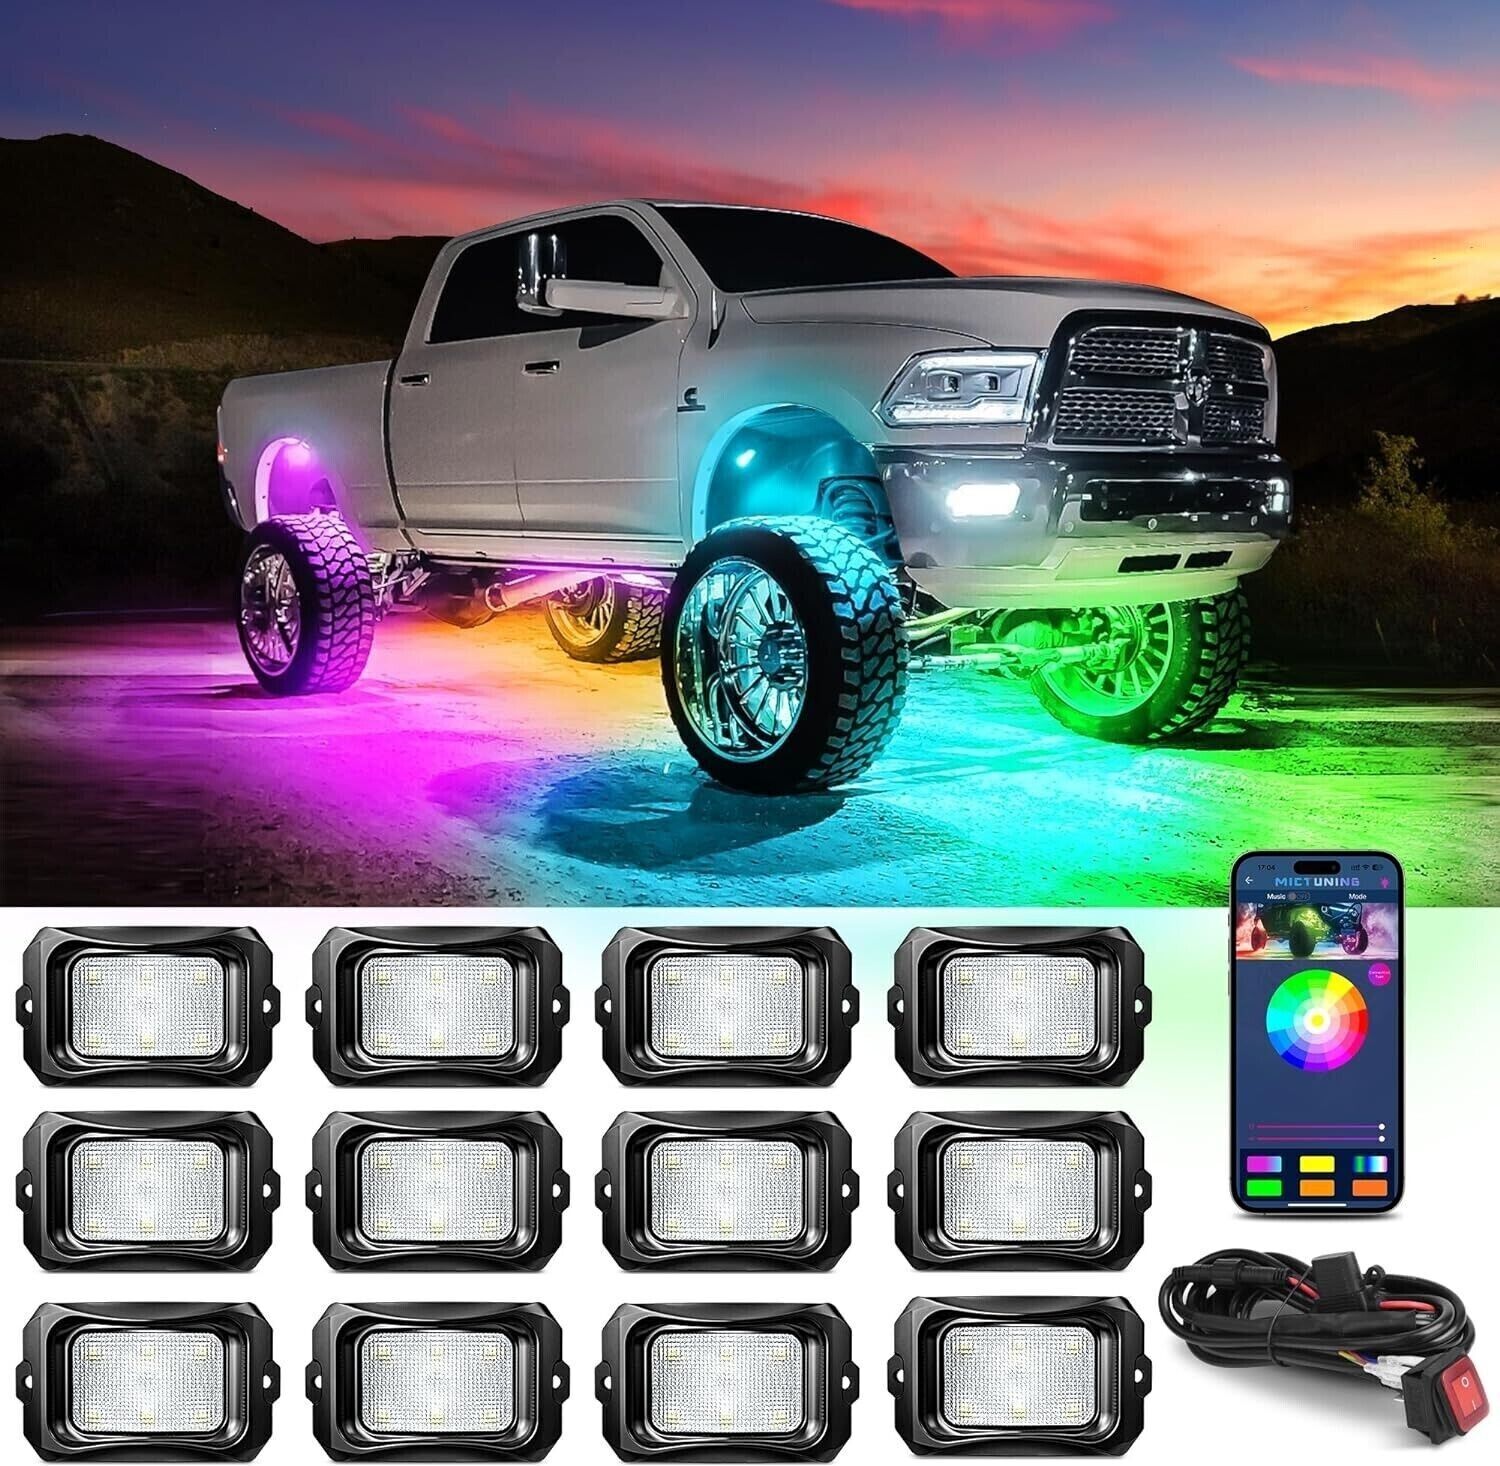 MICTUNING C2 Max RGB+IC Chasing Color LED Rock Lights-12 Pods Underglow Lighting